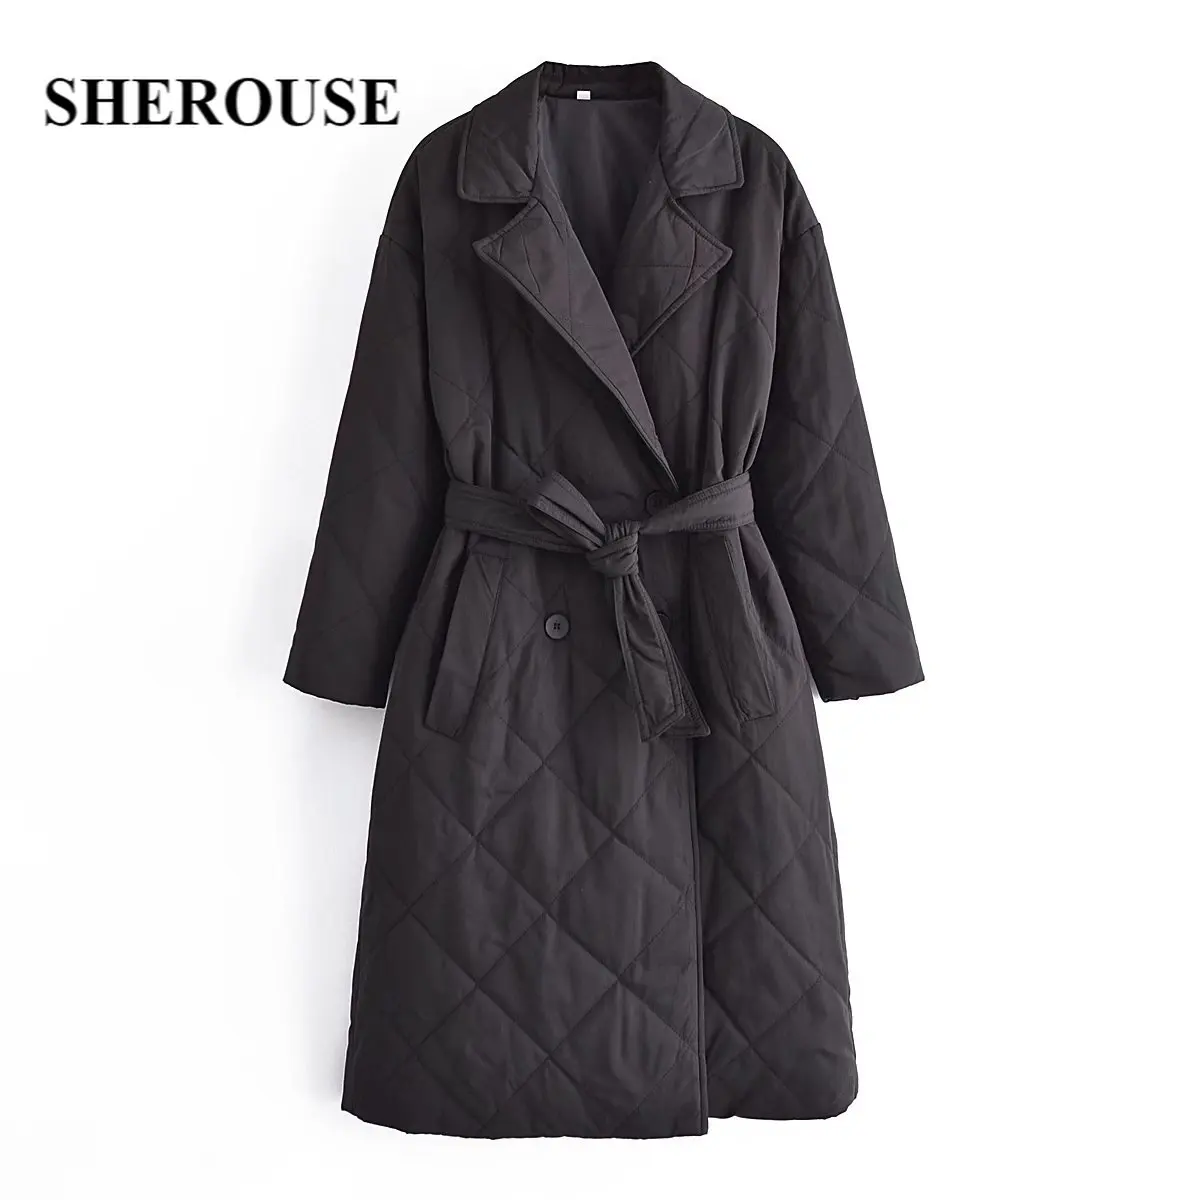 

Sherouse Women Fashion With Belt Black Double Breasted Trench Coat Vintage Notched Neck Long Sleeves Windbreaker Female Outfit